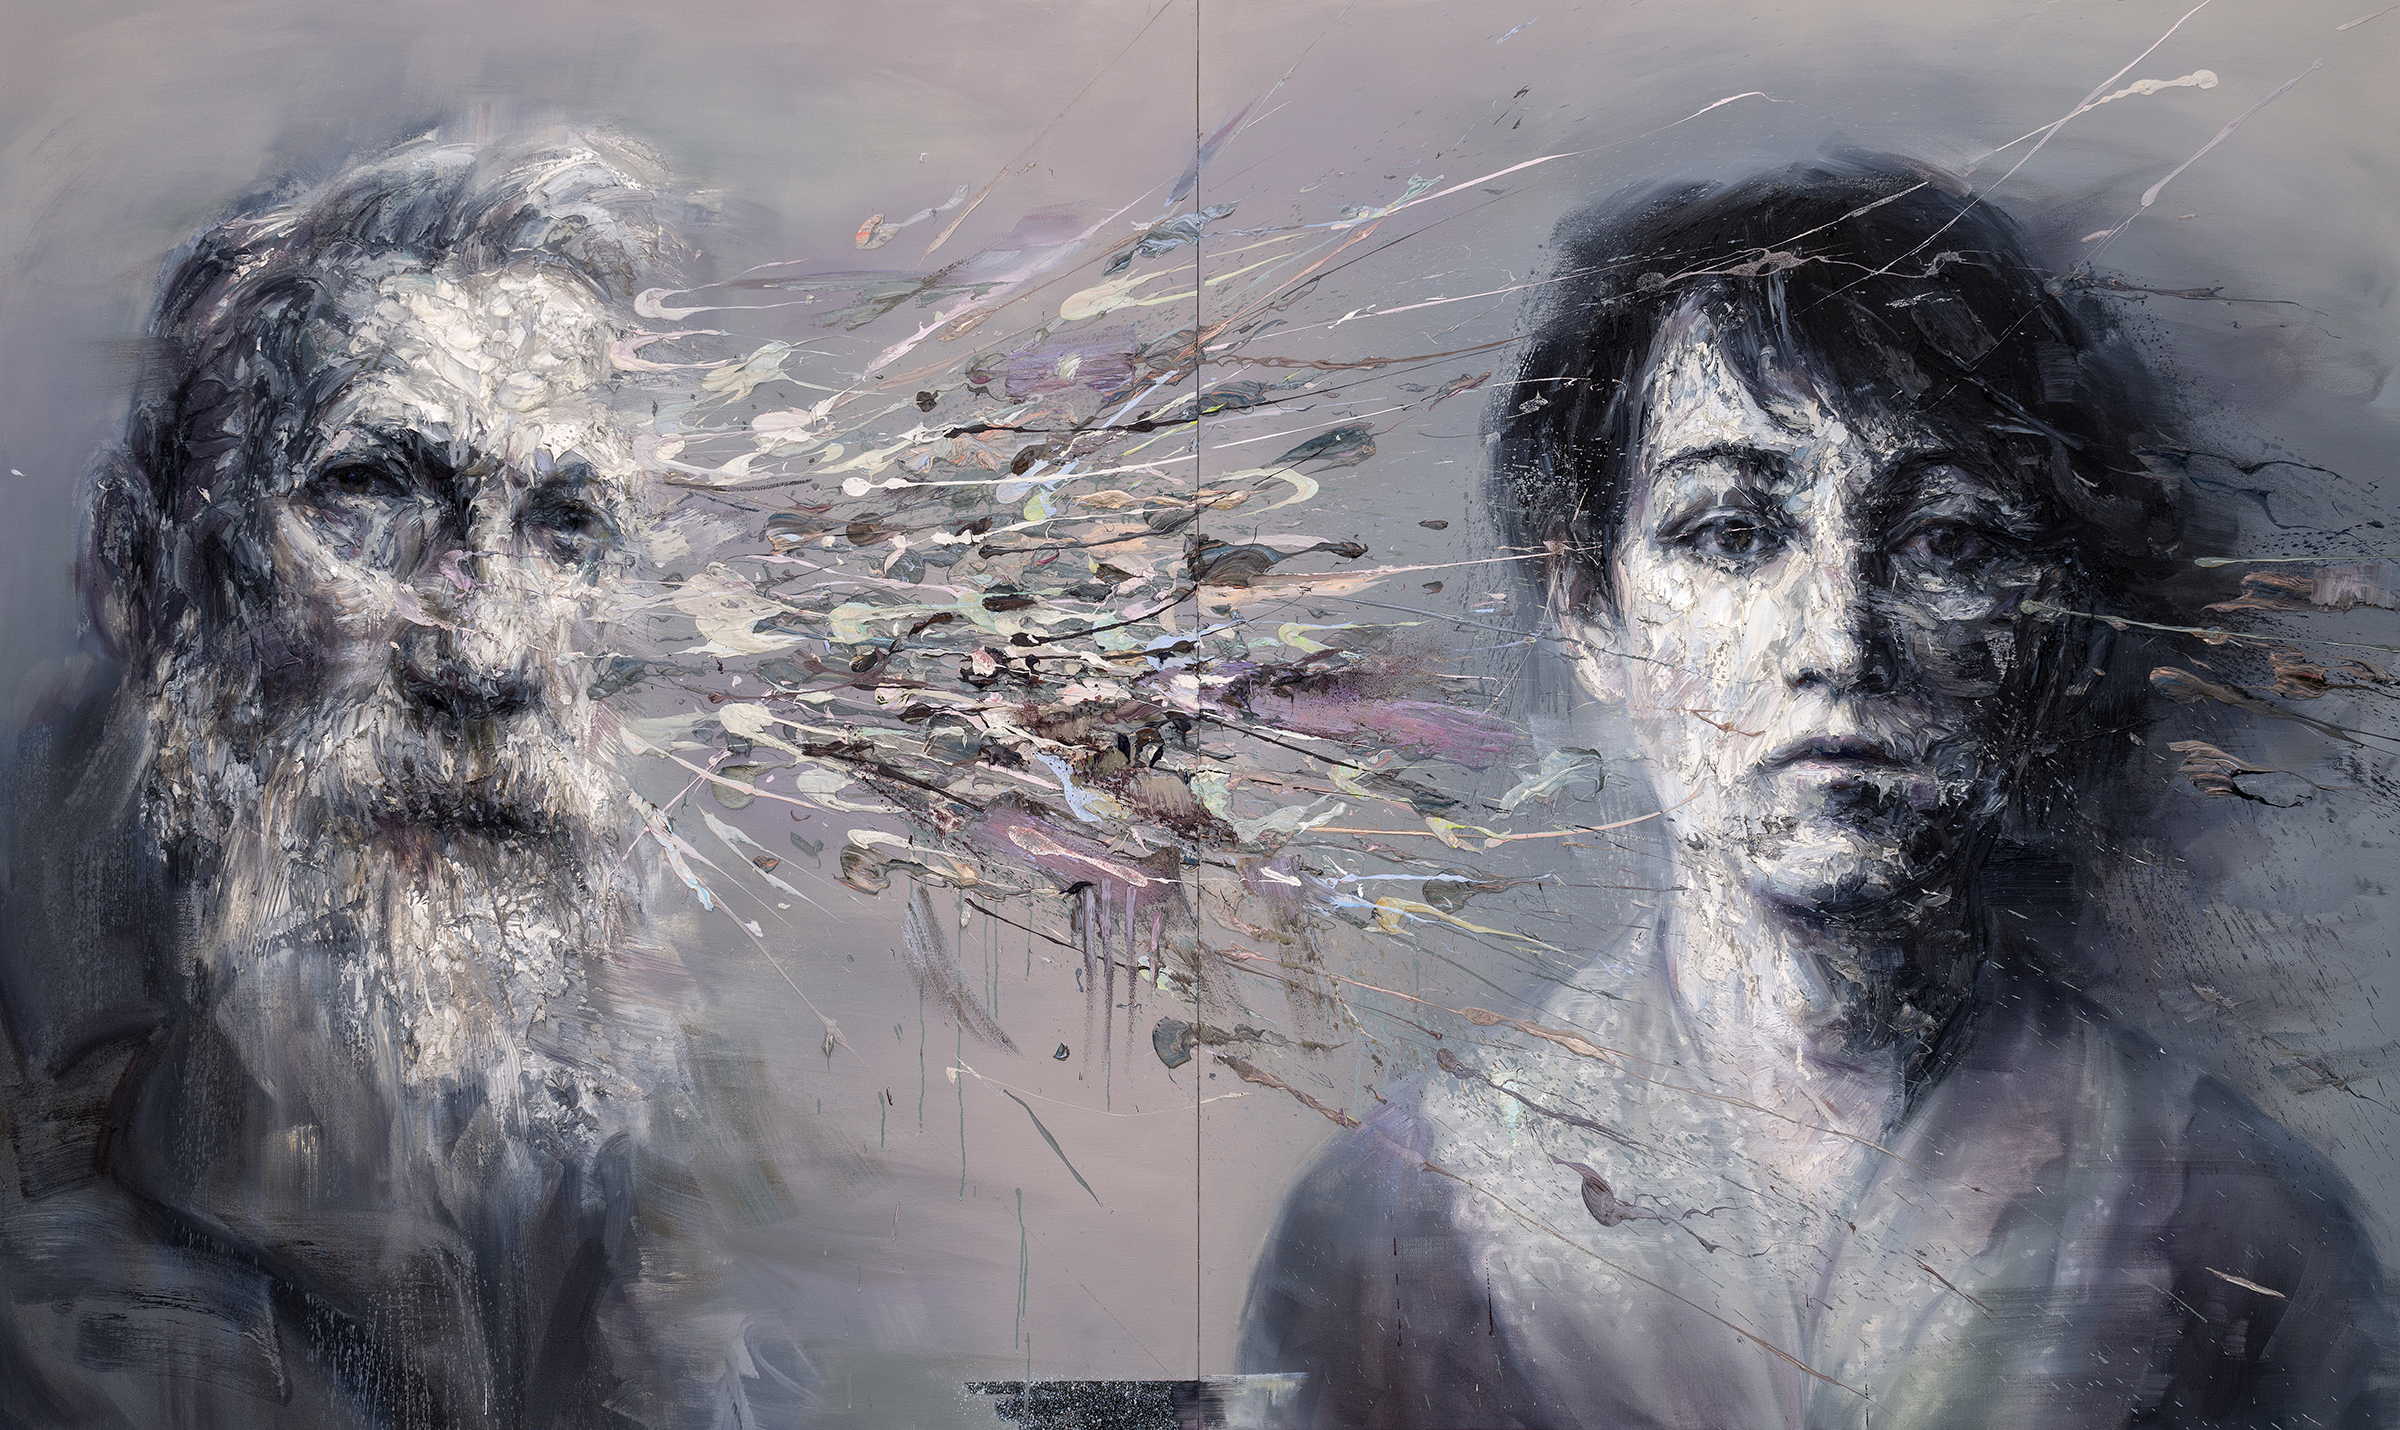 Auguste Rodin and Camille Claudel (diptych), oil on linen, 72"X120", 2019